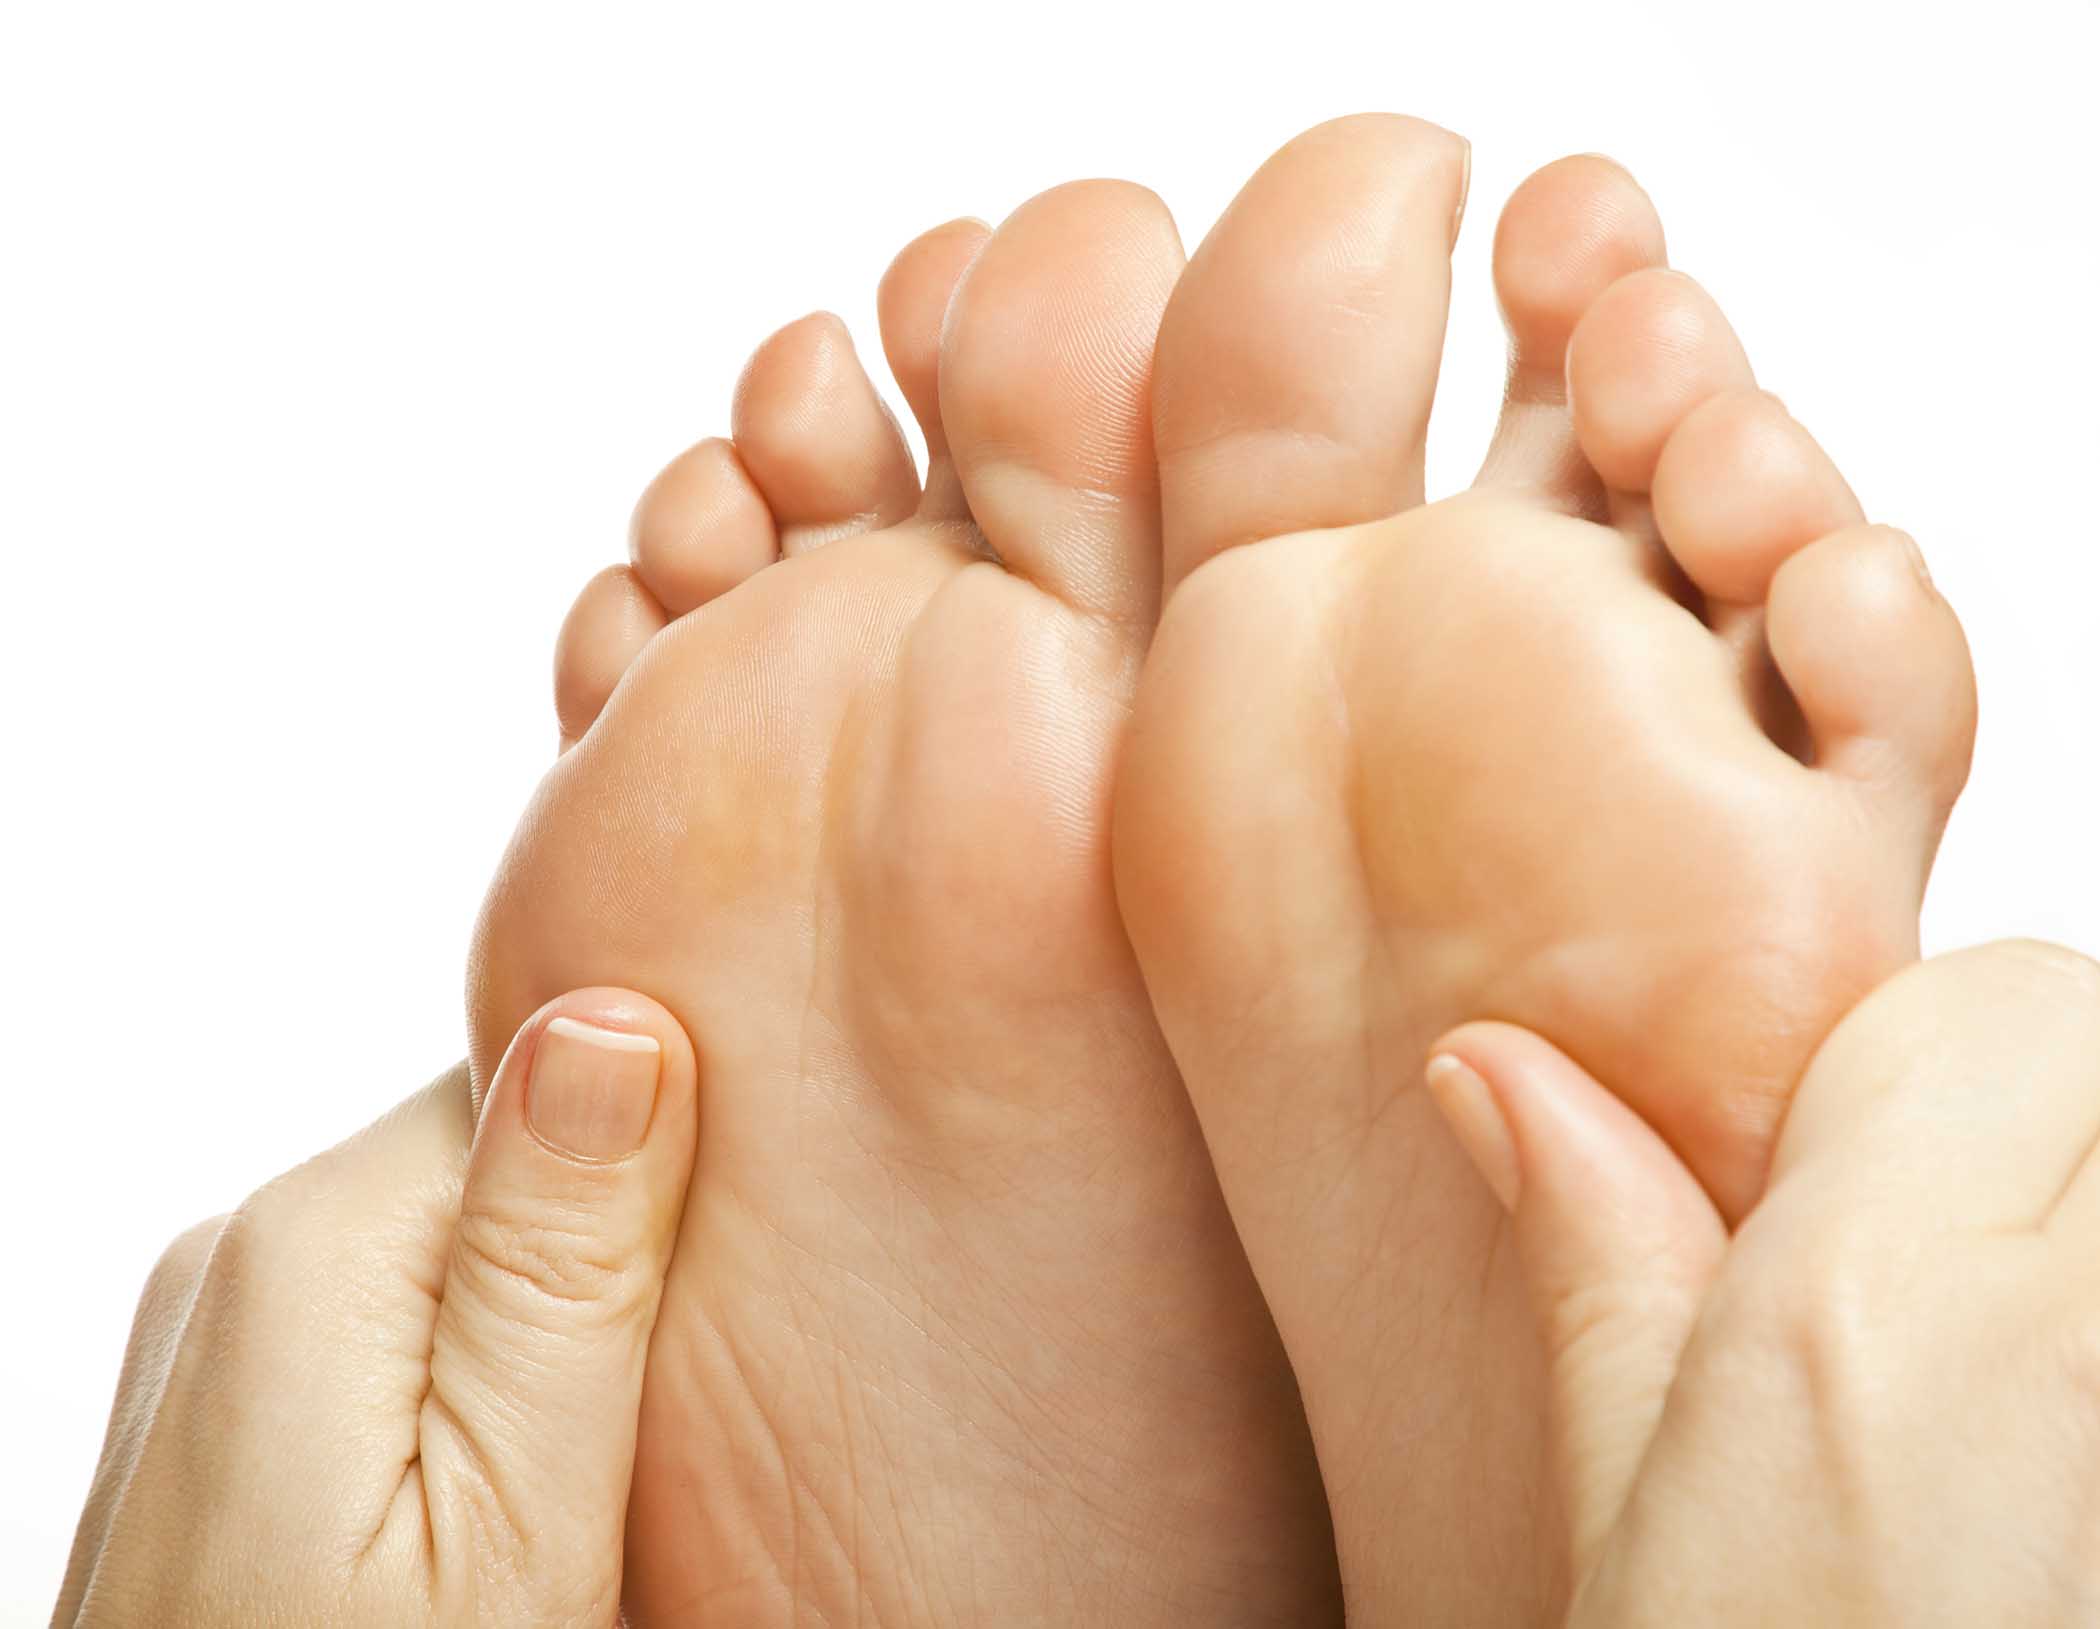 Why is diabetic foot care important?